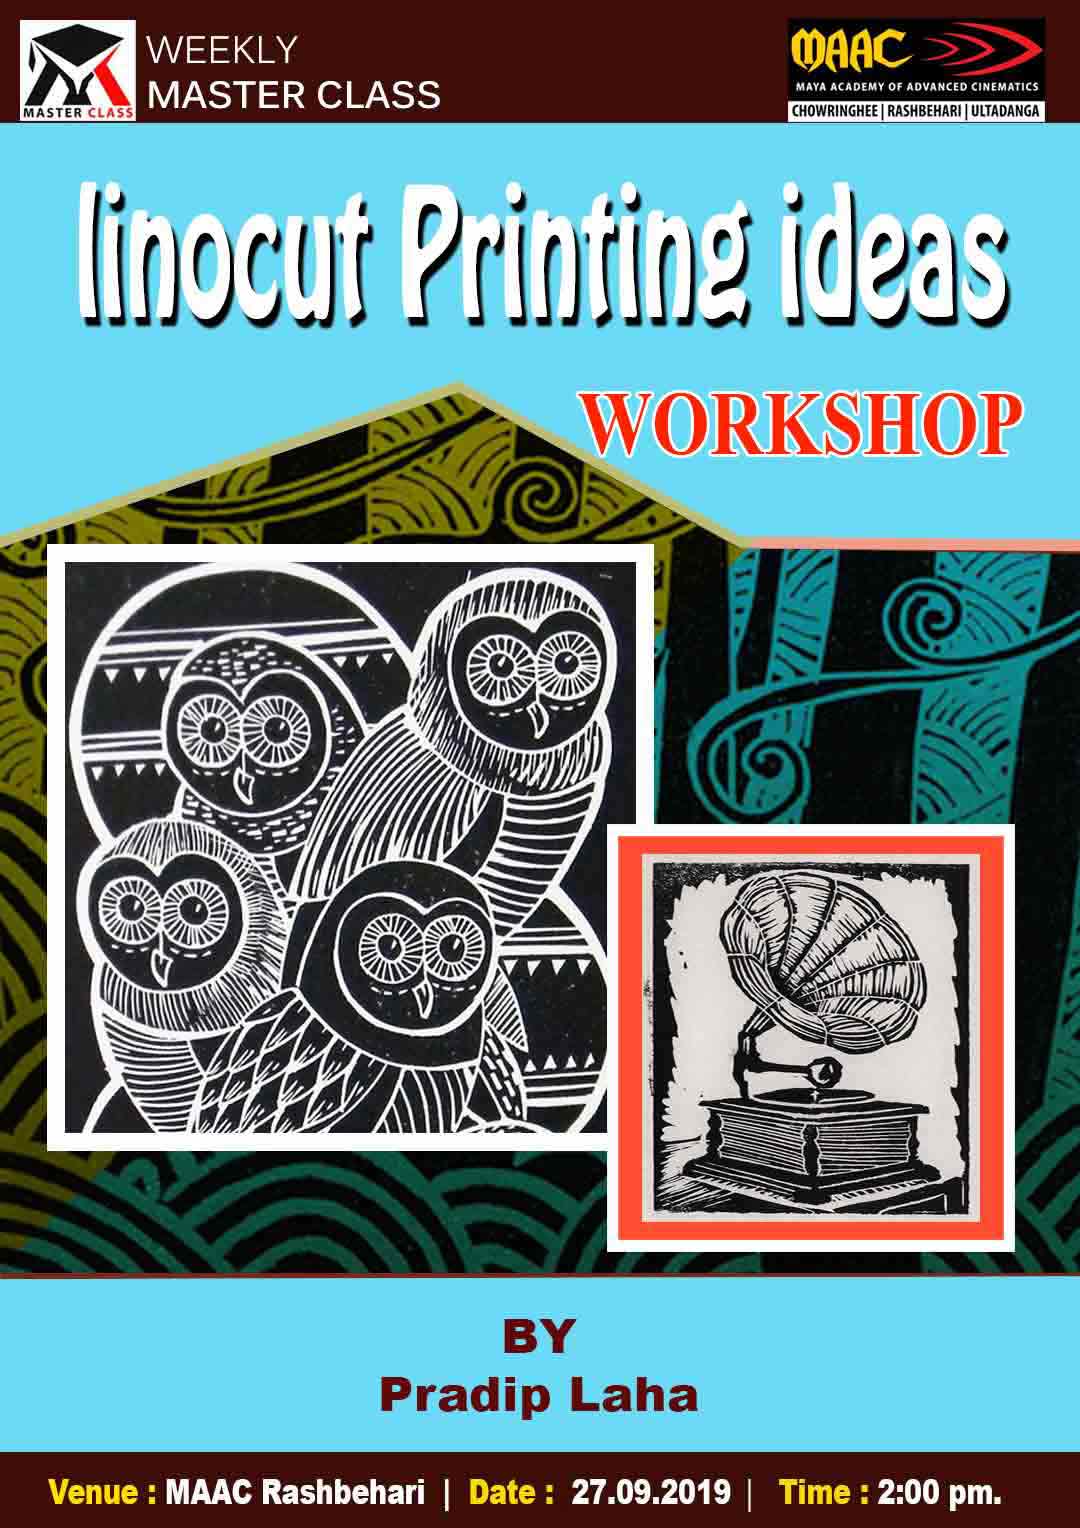 Weekly Master Class on Lino Printing Ideas